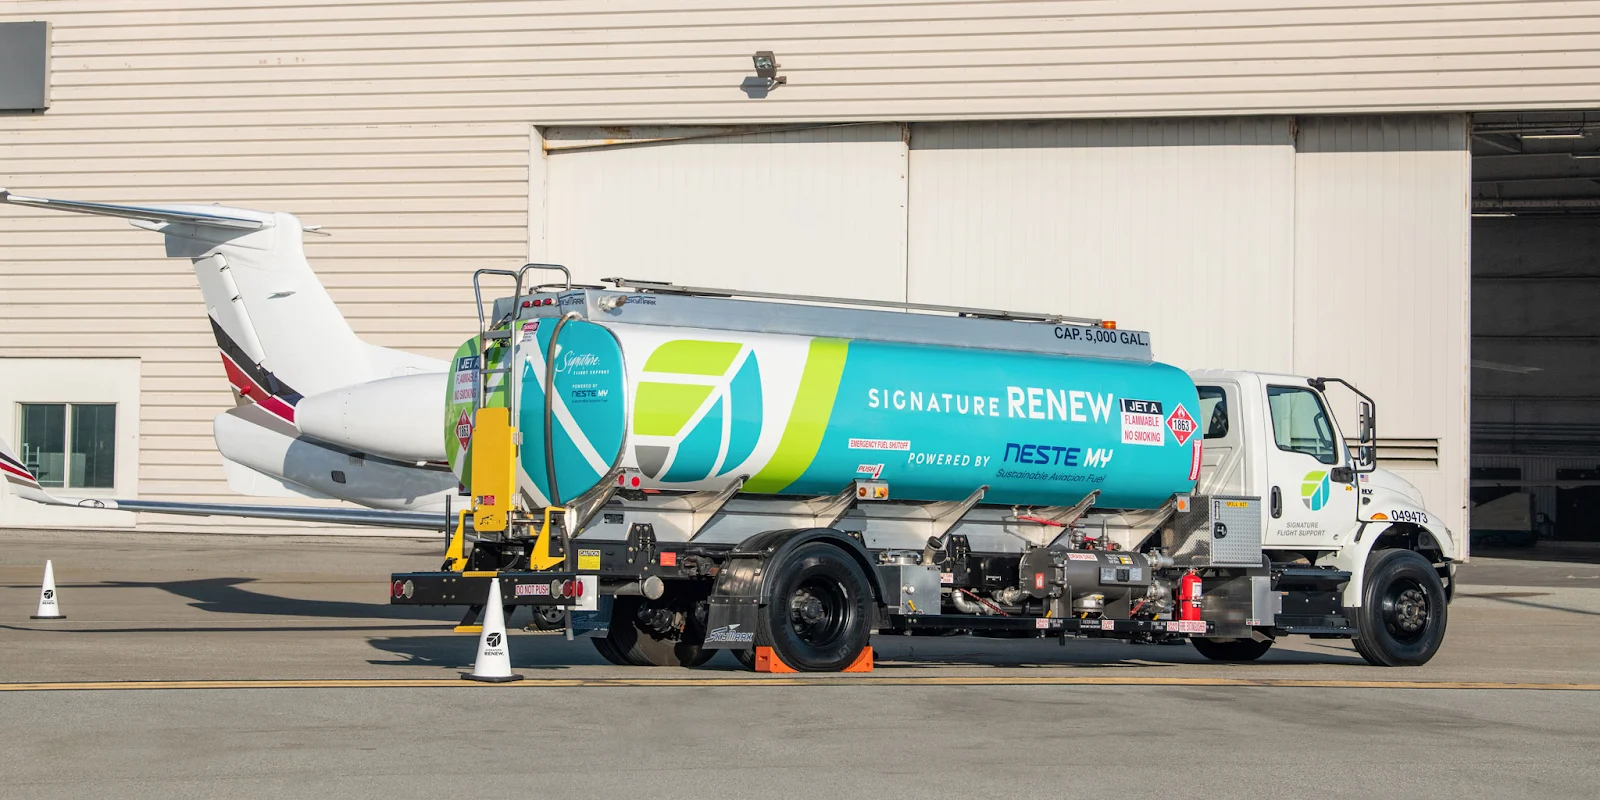 Signature Flight Support and Neste are powering business aviation with sustainable aviation fuel.